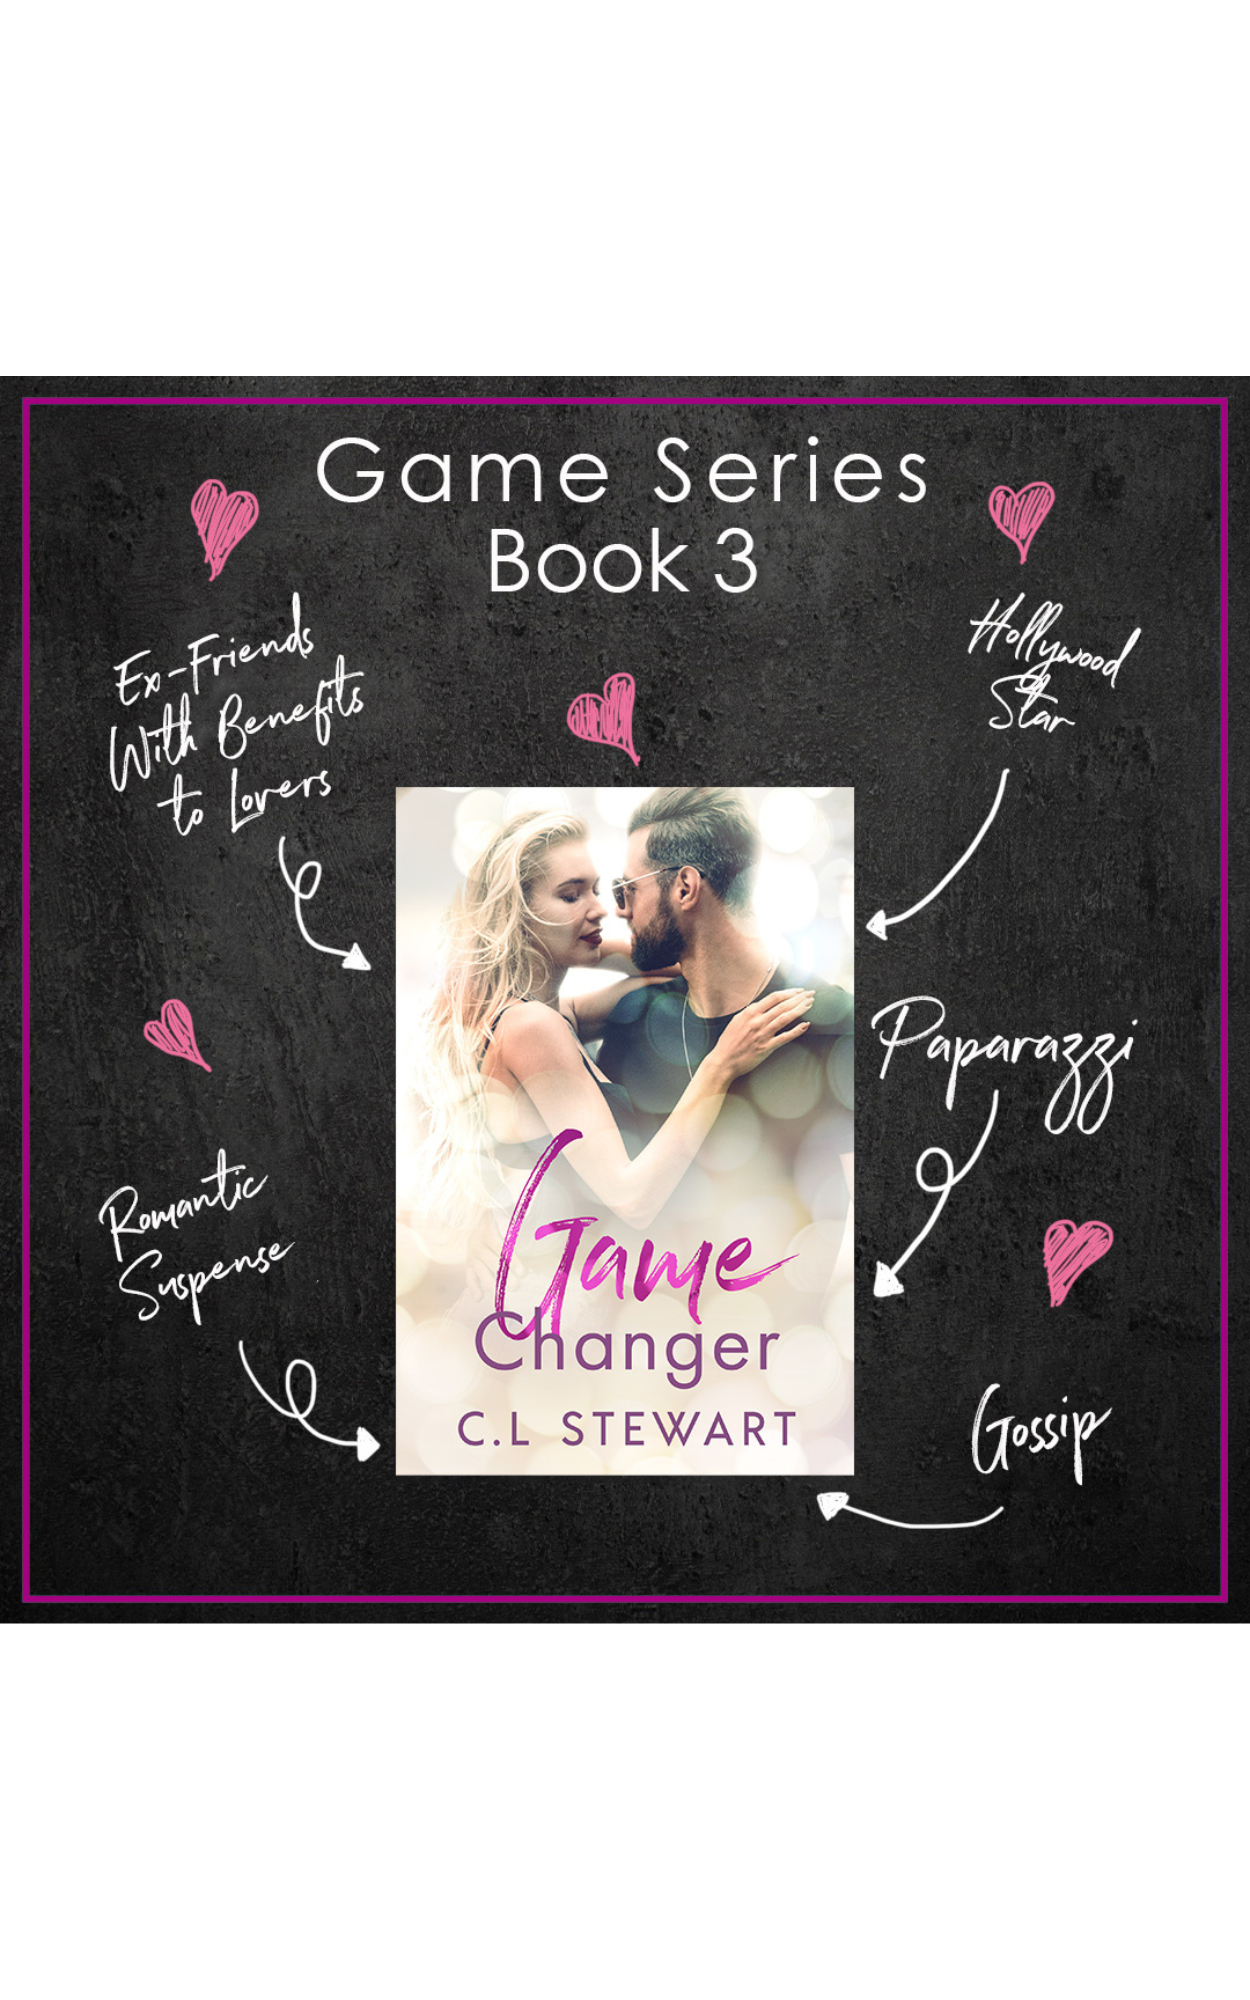 Game Series Book 3 - Game Changer